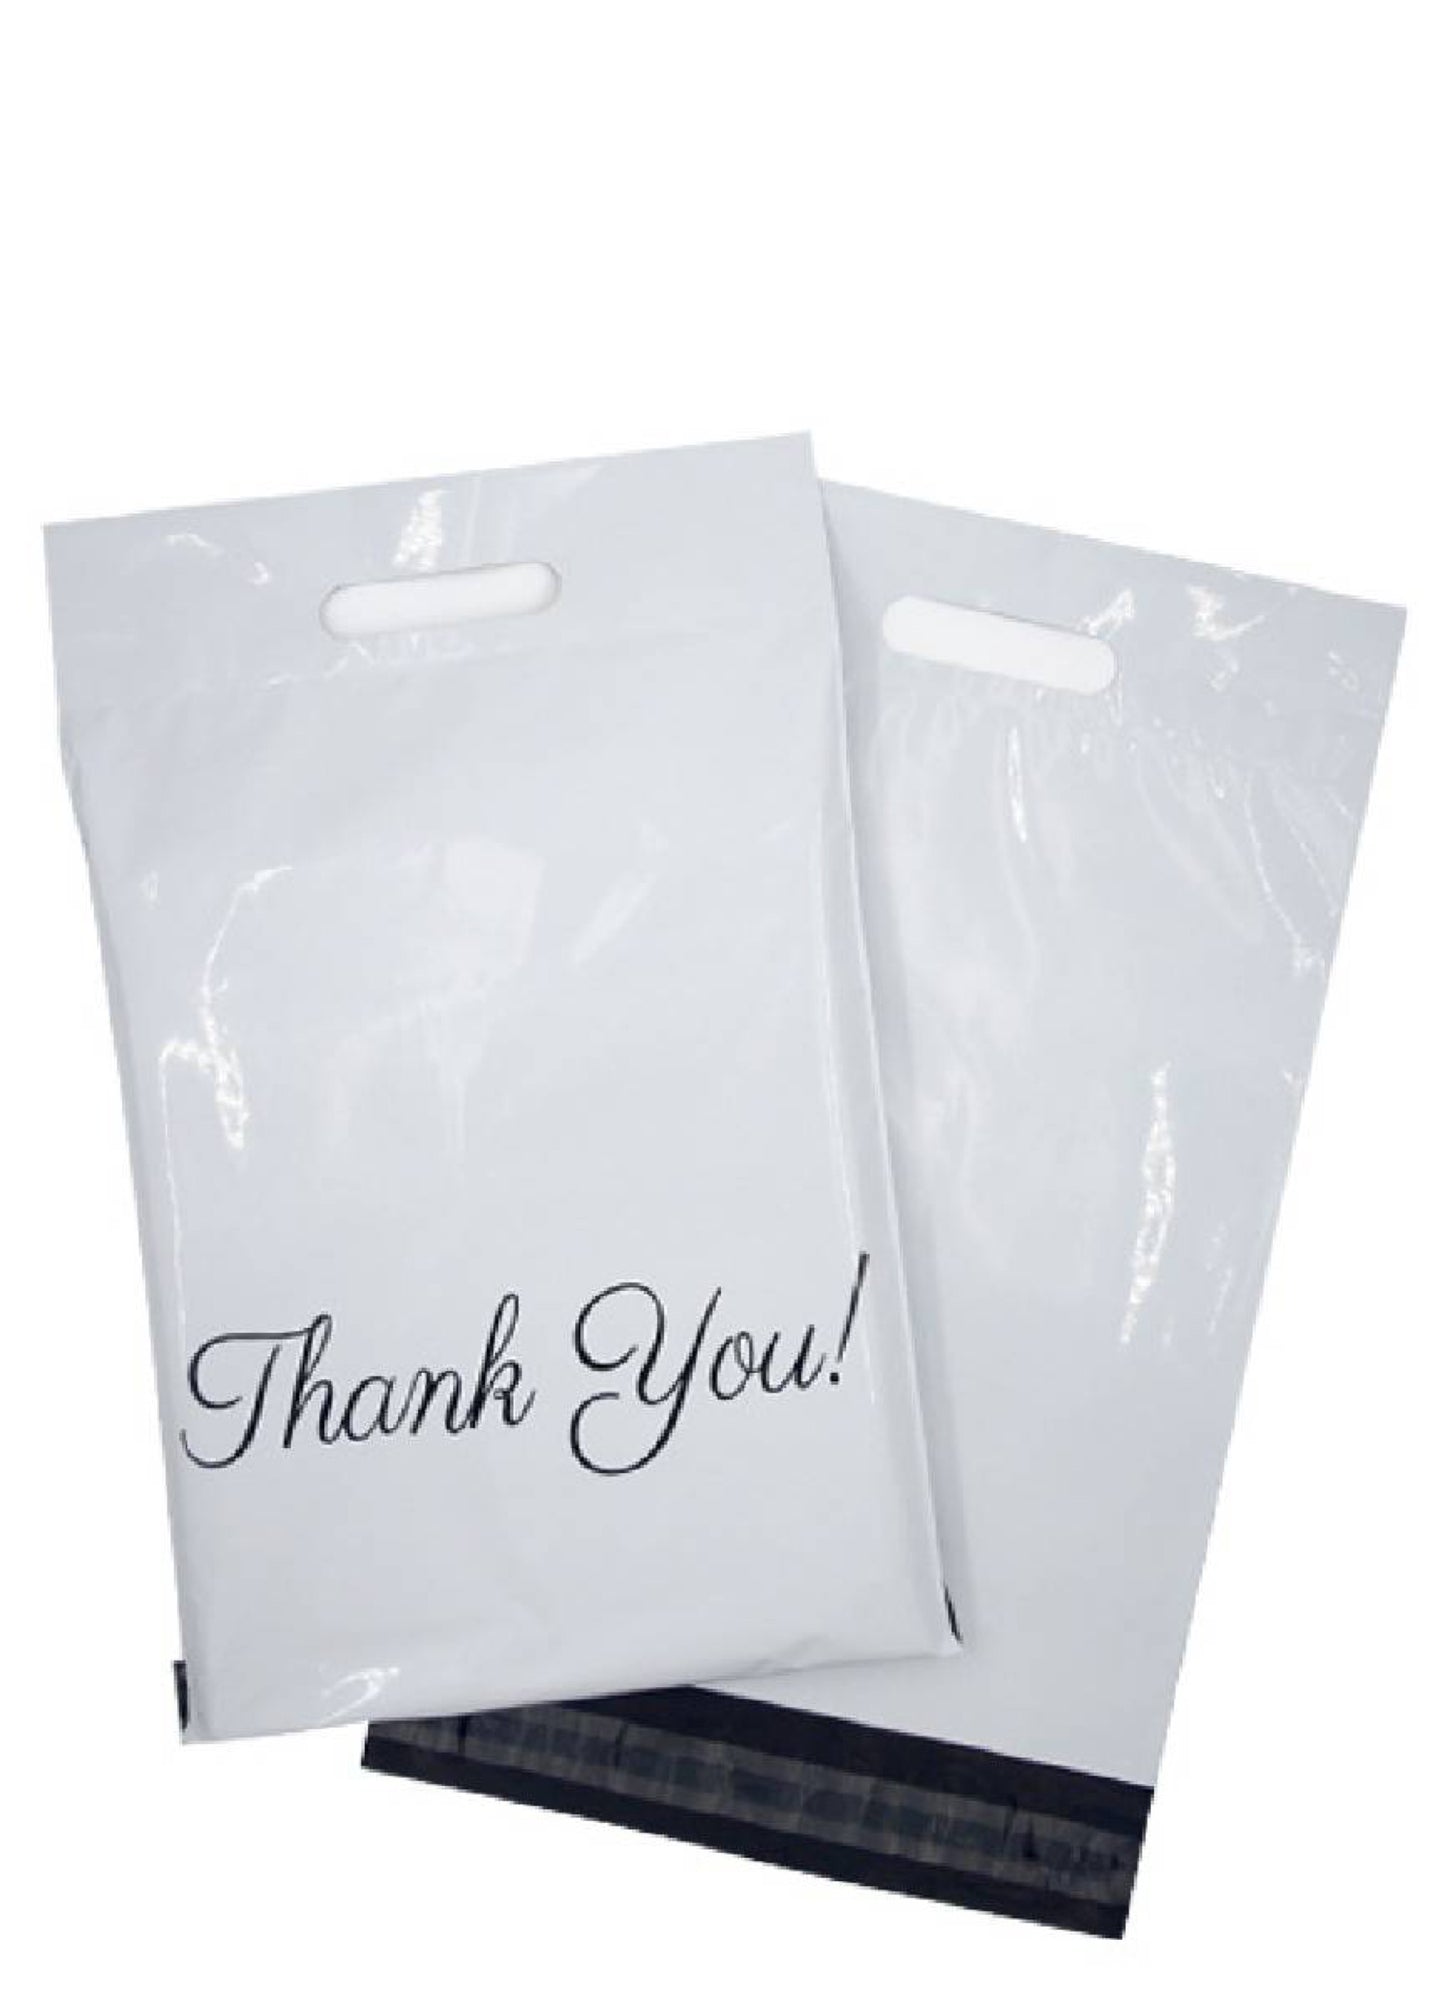 Thank you packaging bag